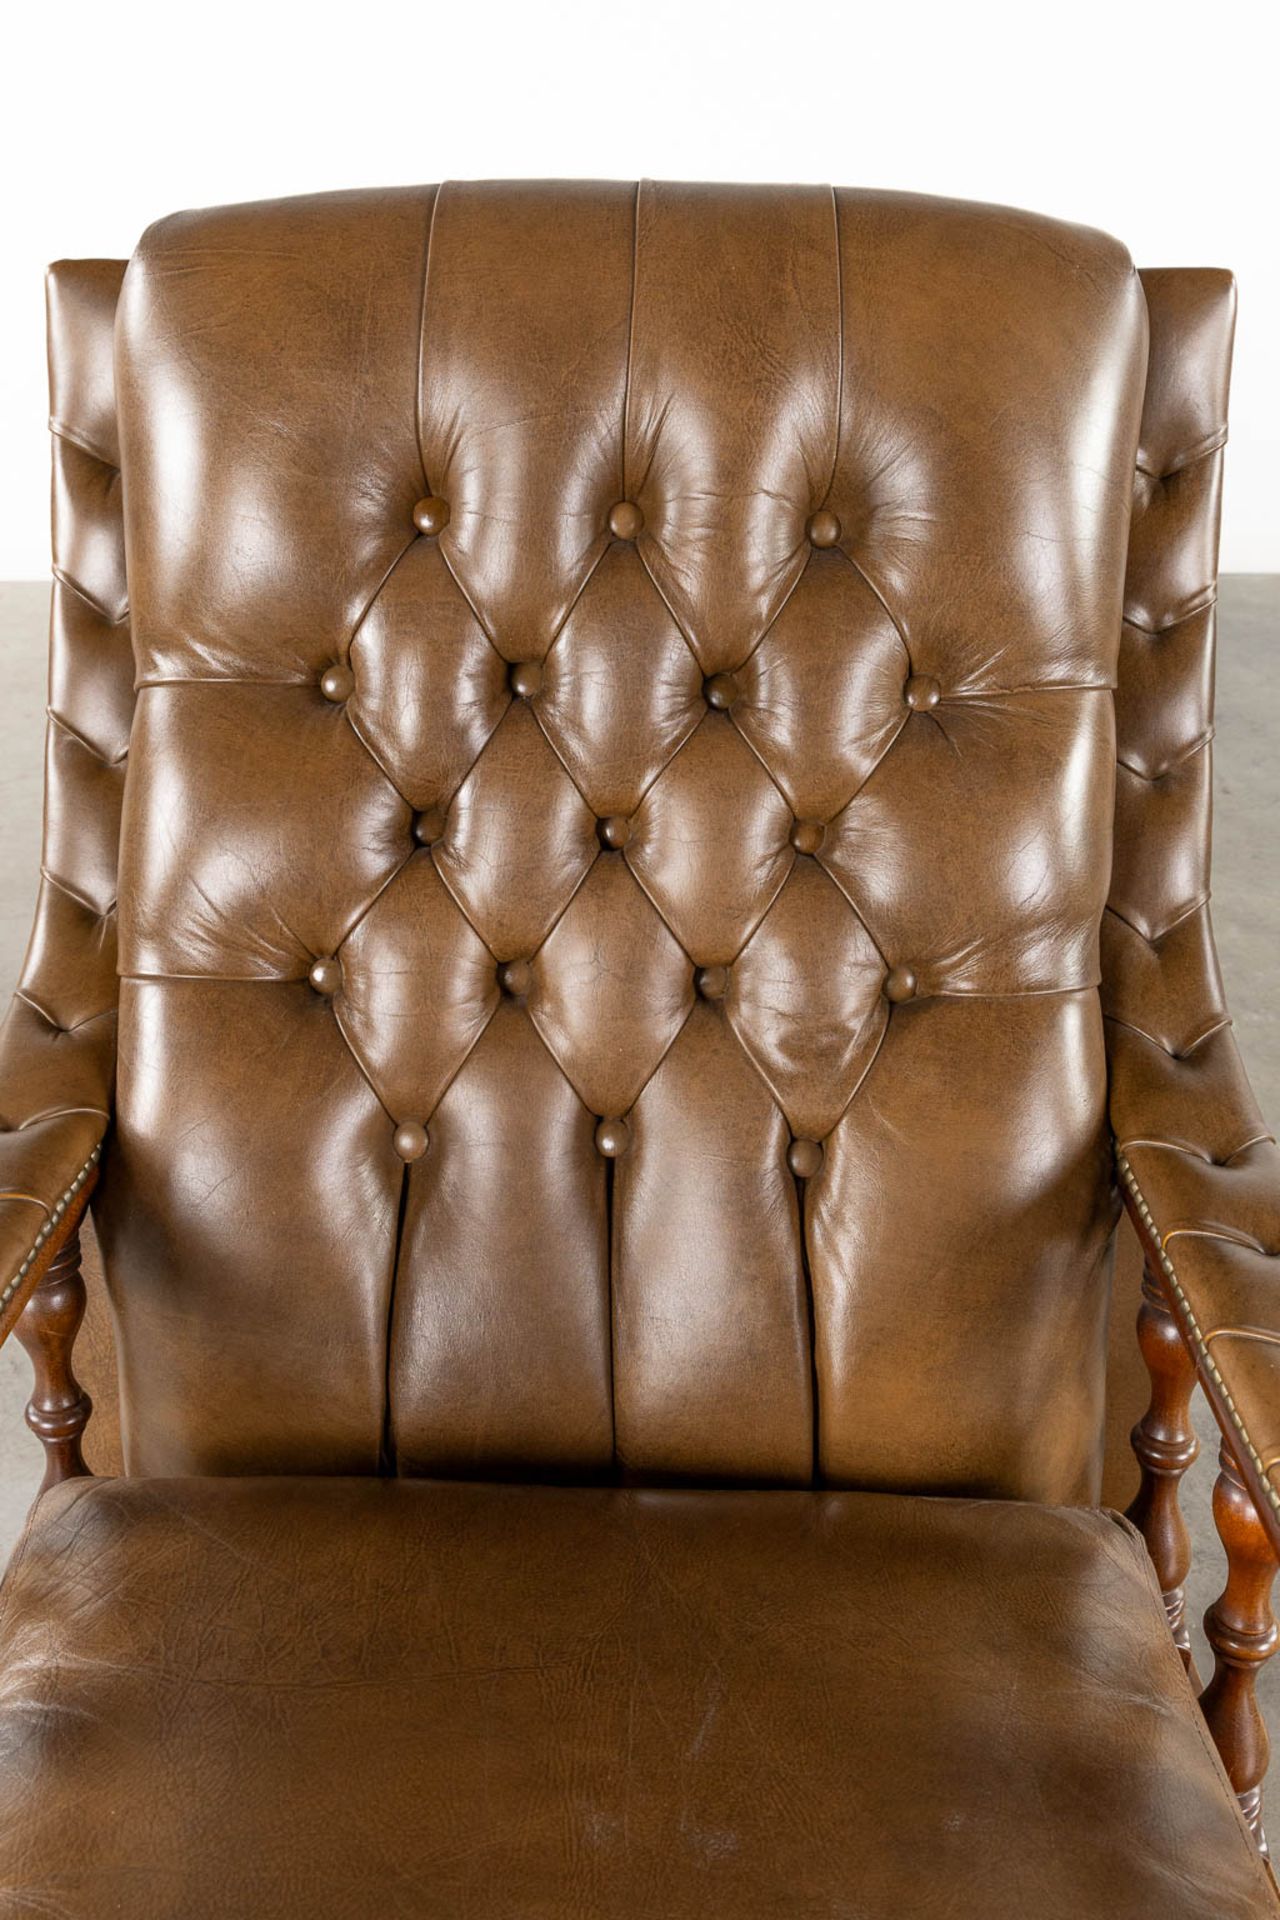 A pair of relax chairs, leather and wood in Chesterfield style. (L:83 x W:74 x H:95 cm) - Bild 9 aus 11